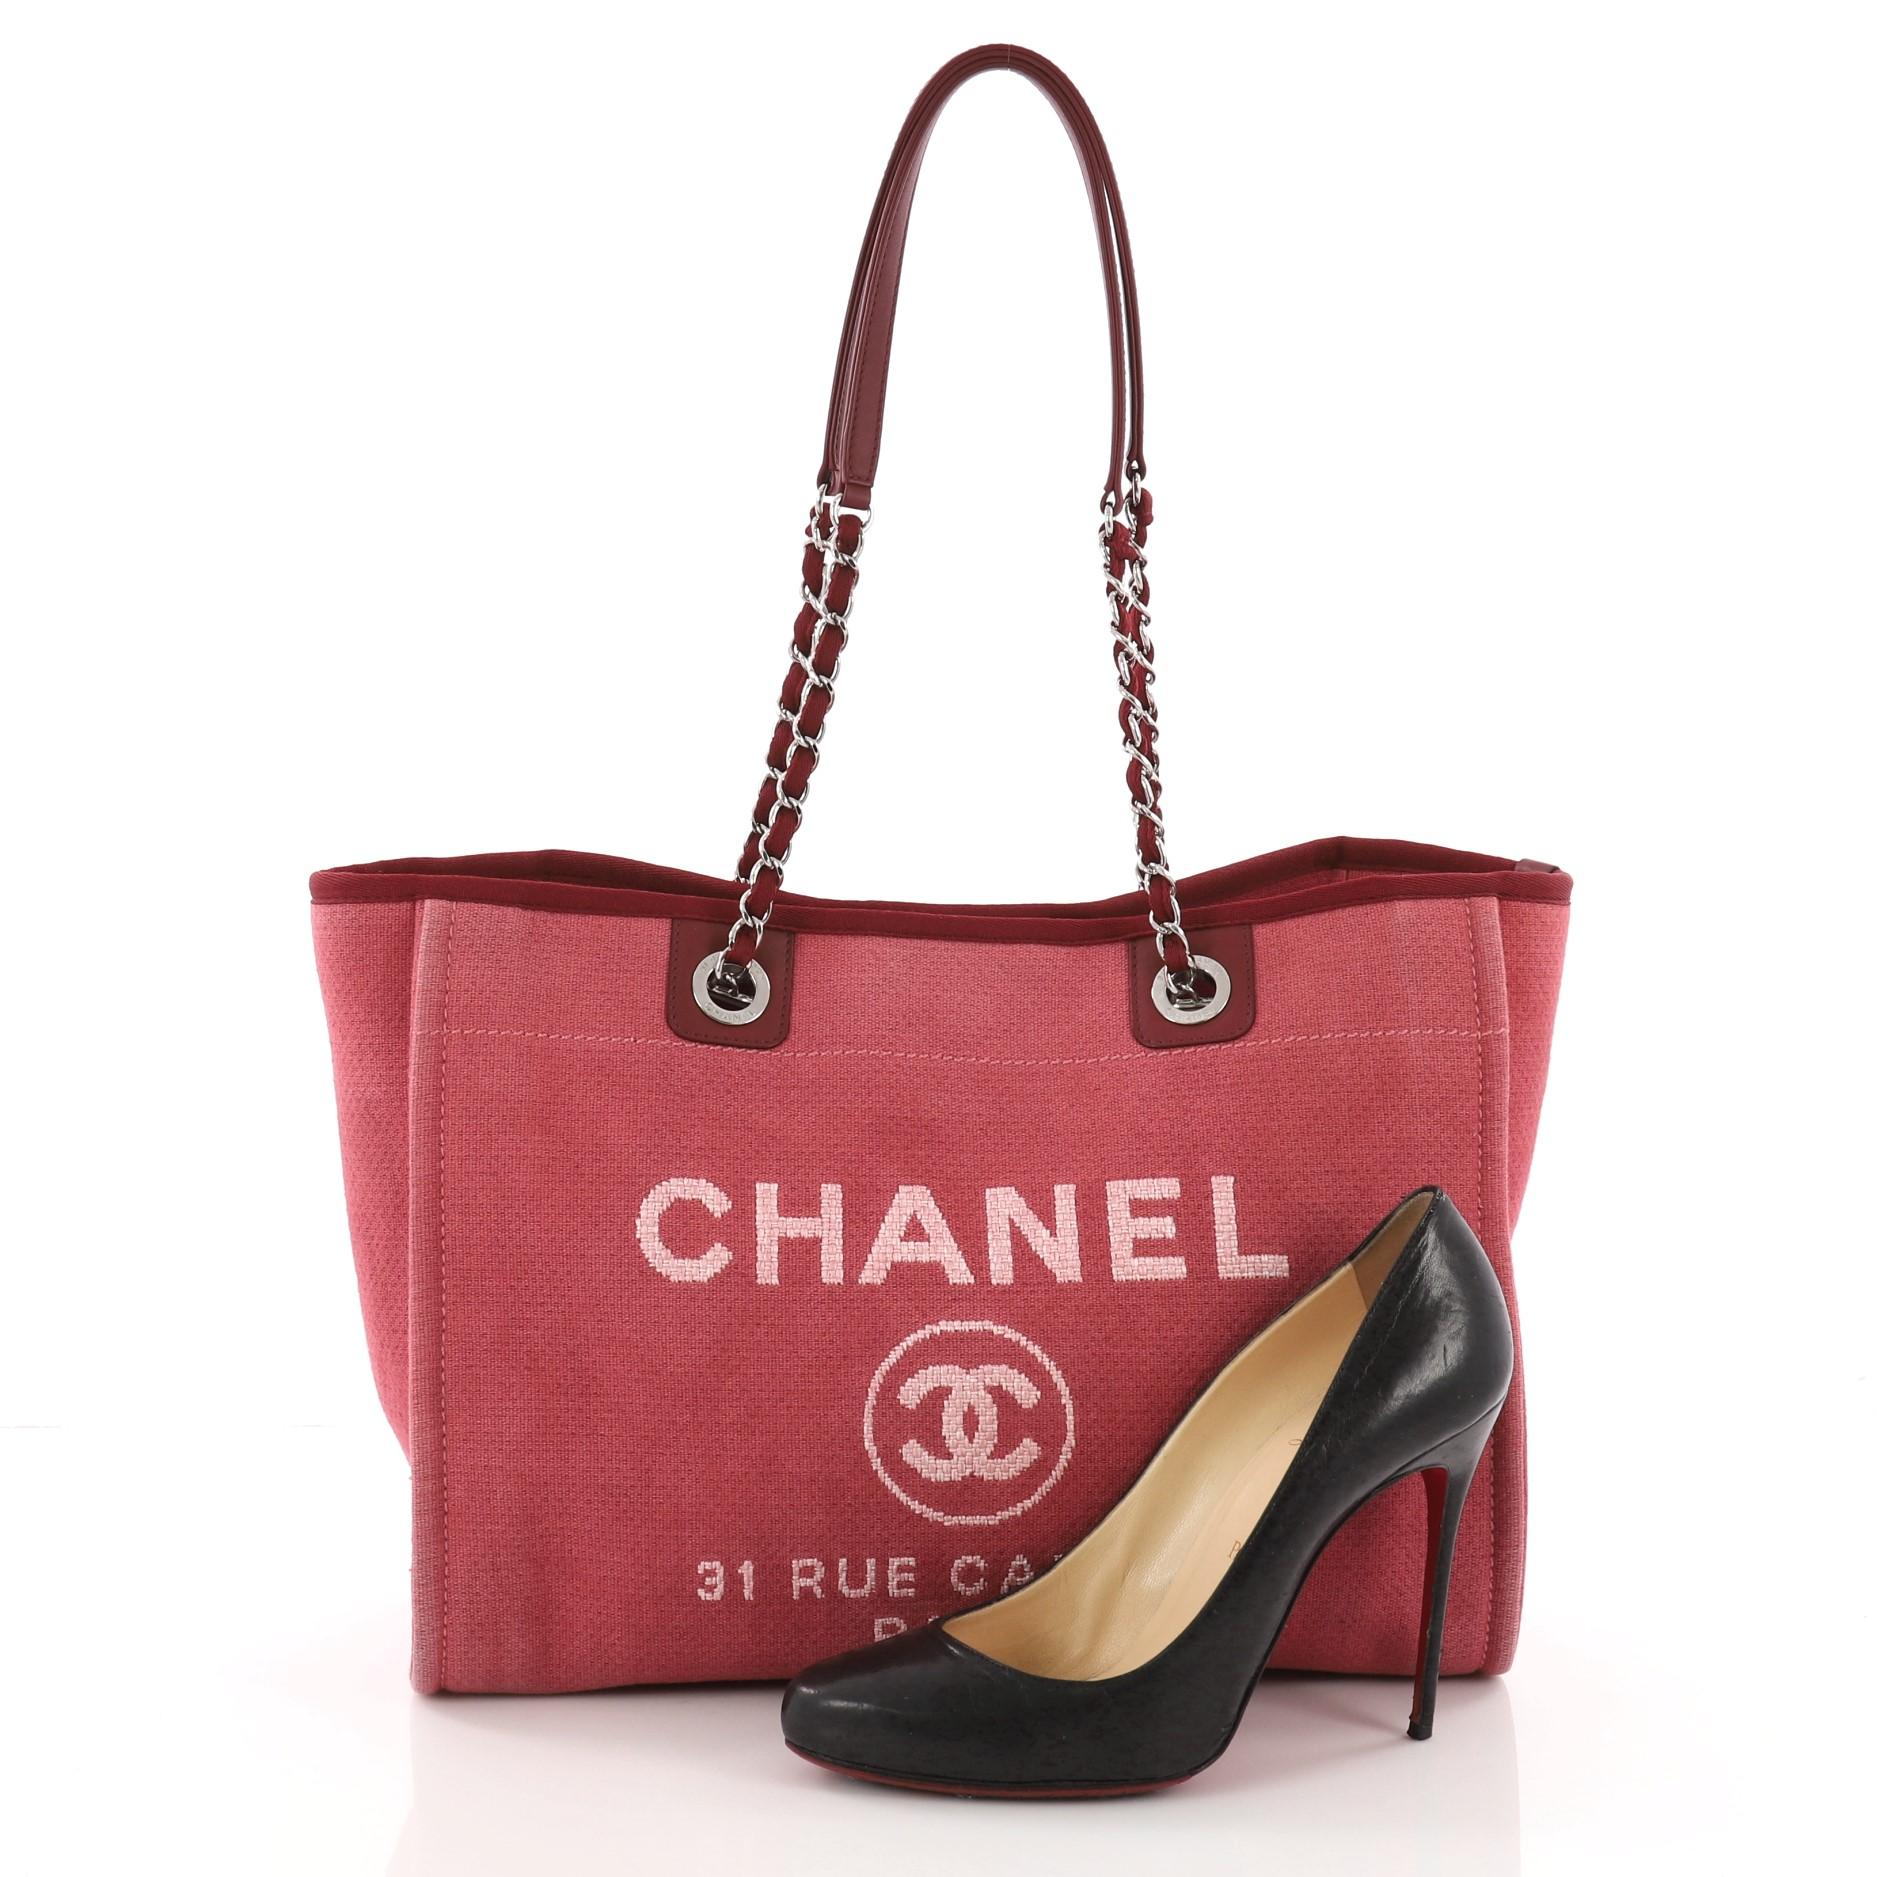 This authentic Chanel Deauville Chain Tote Canvas Small embodies a casual-chic style made for any fashionista. Crafted in dark red canvas, this stylish tote features dual woven-in canvas chain straps, printed CC logo with Chanel's famous Parisian